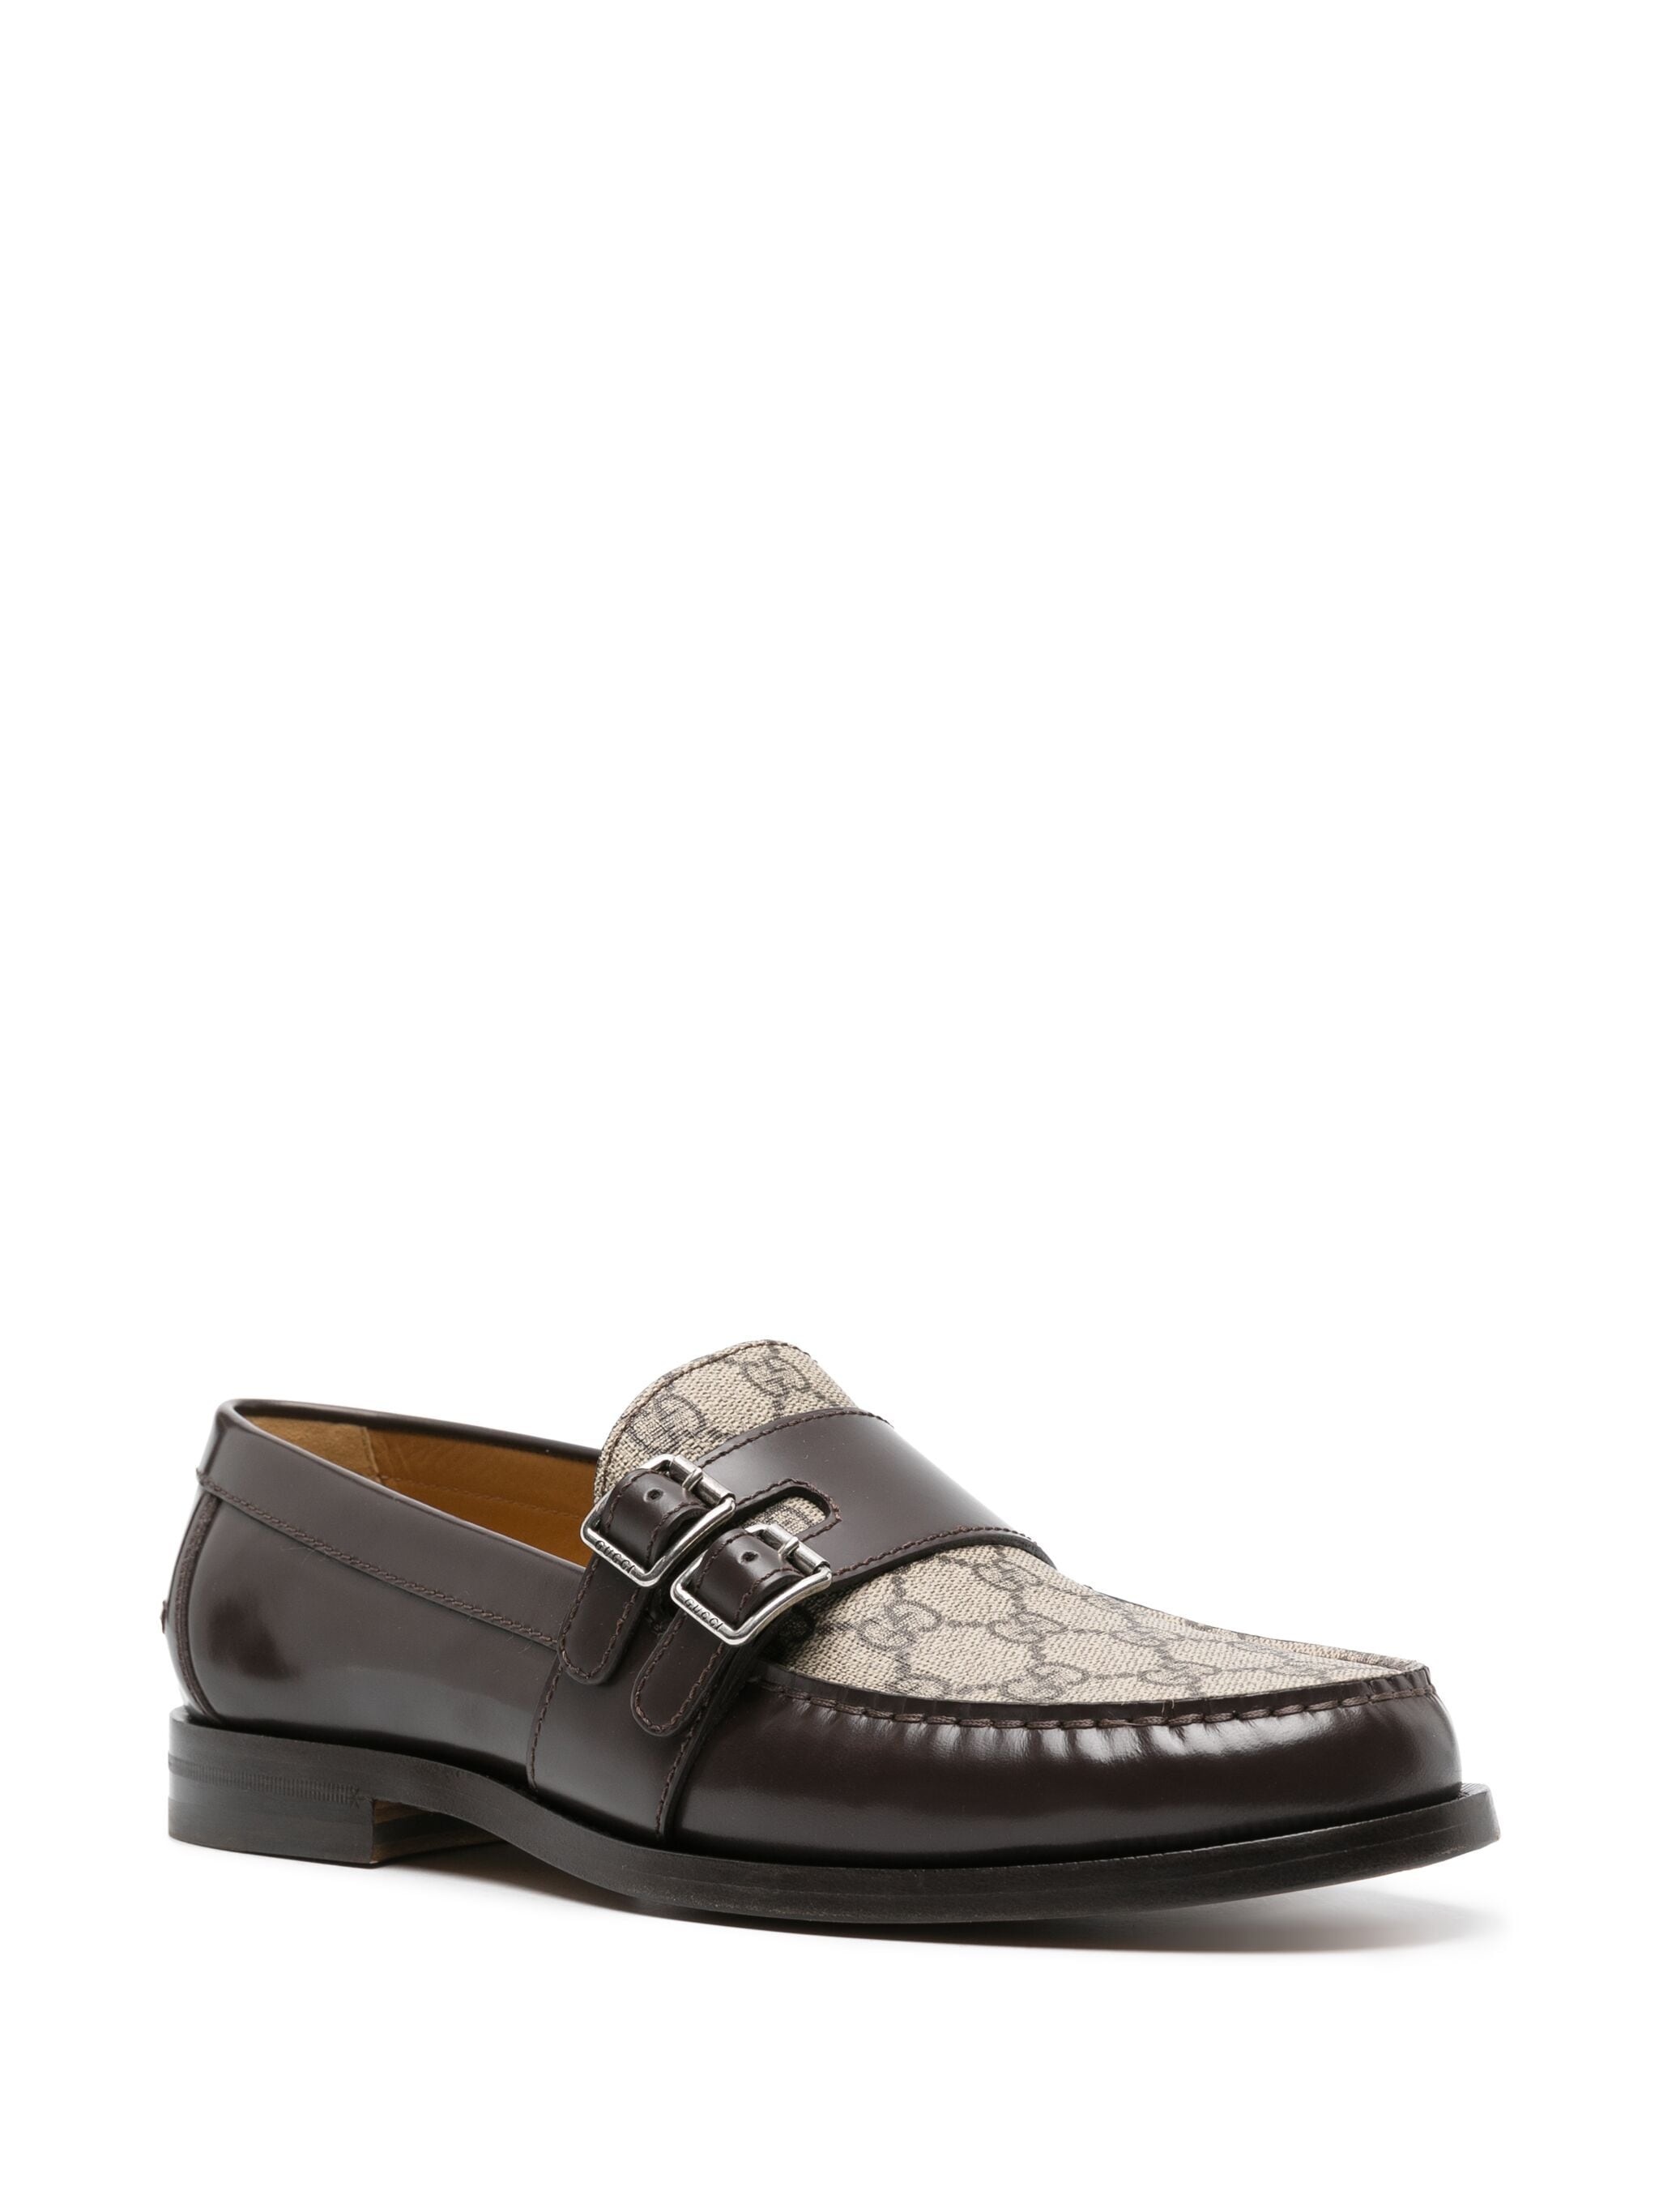 GG Supreme leather loafers - 2